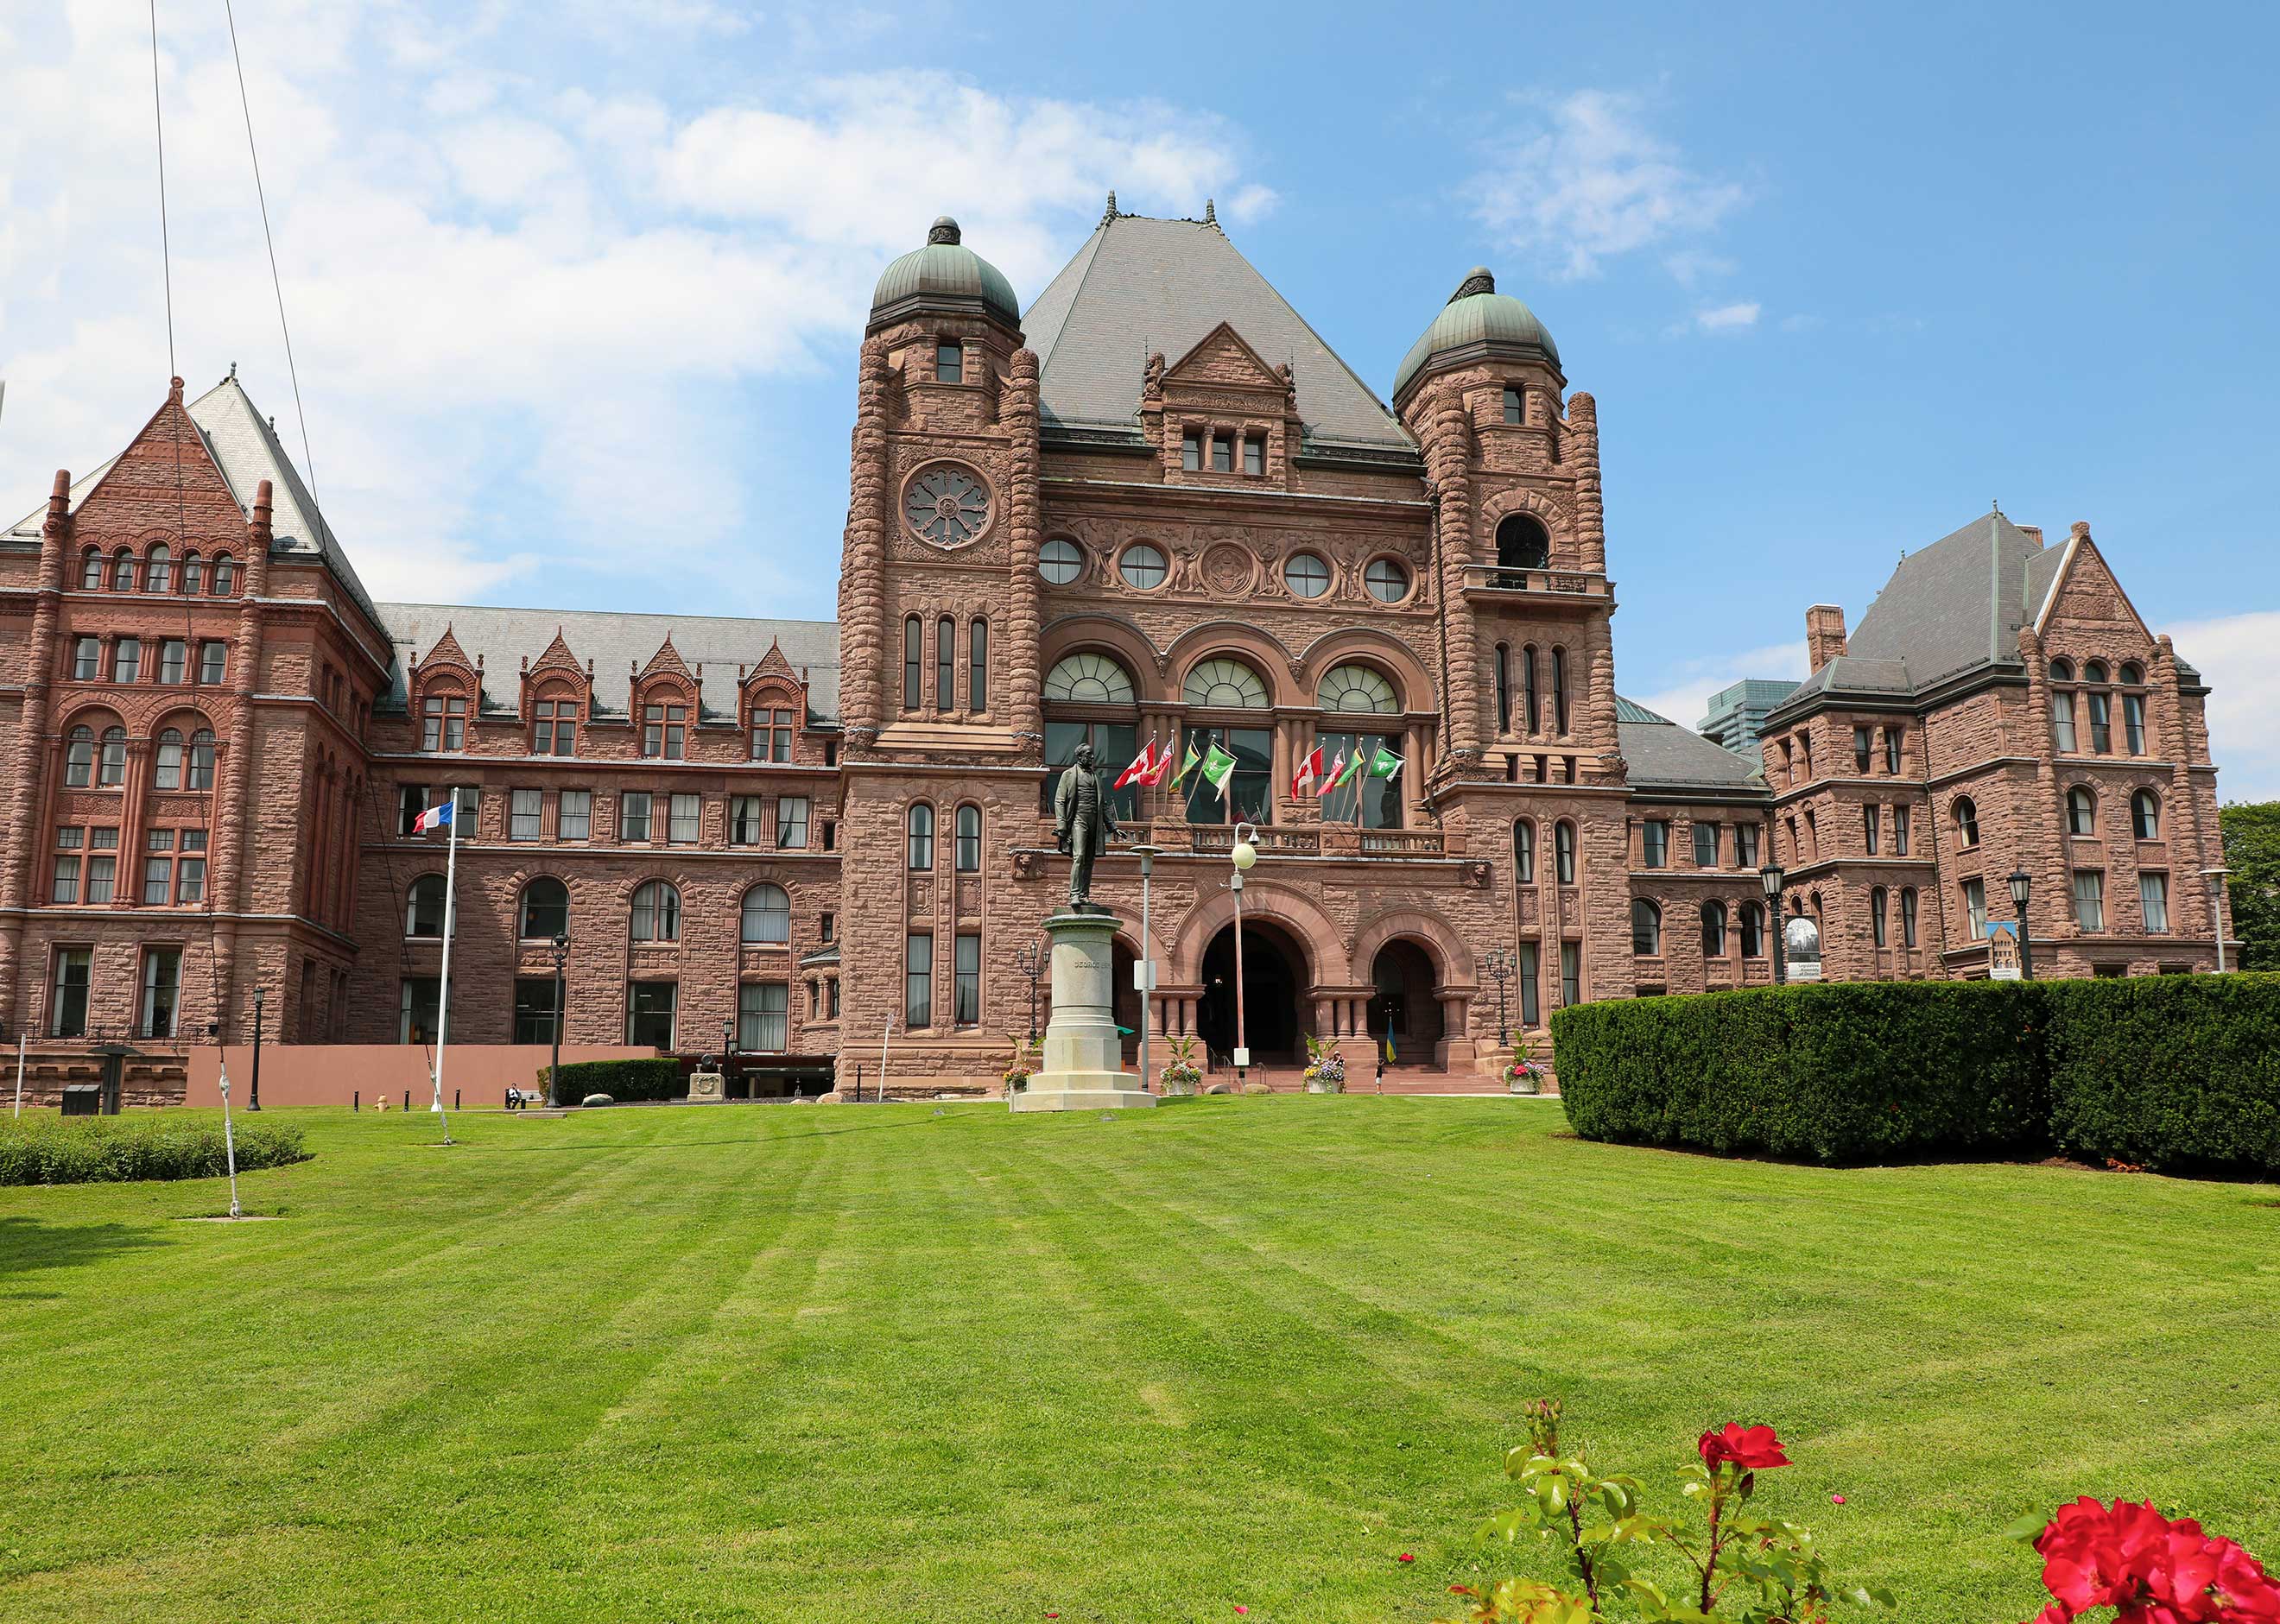 A front view of the Legislative building and green lawn in spring